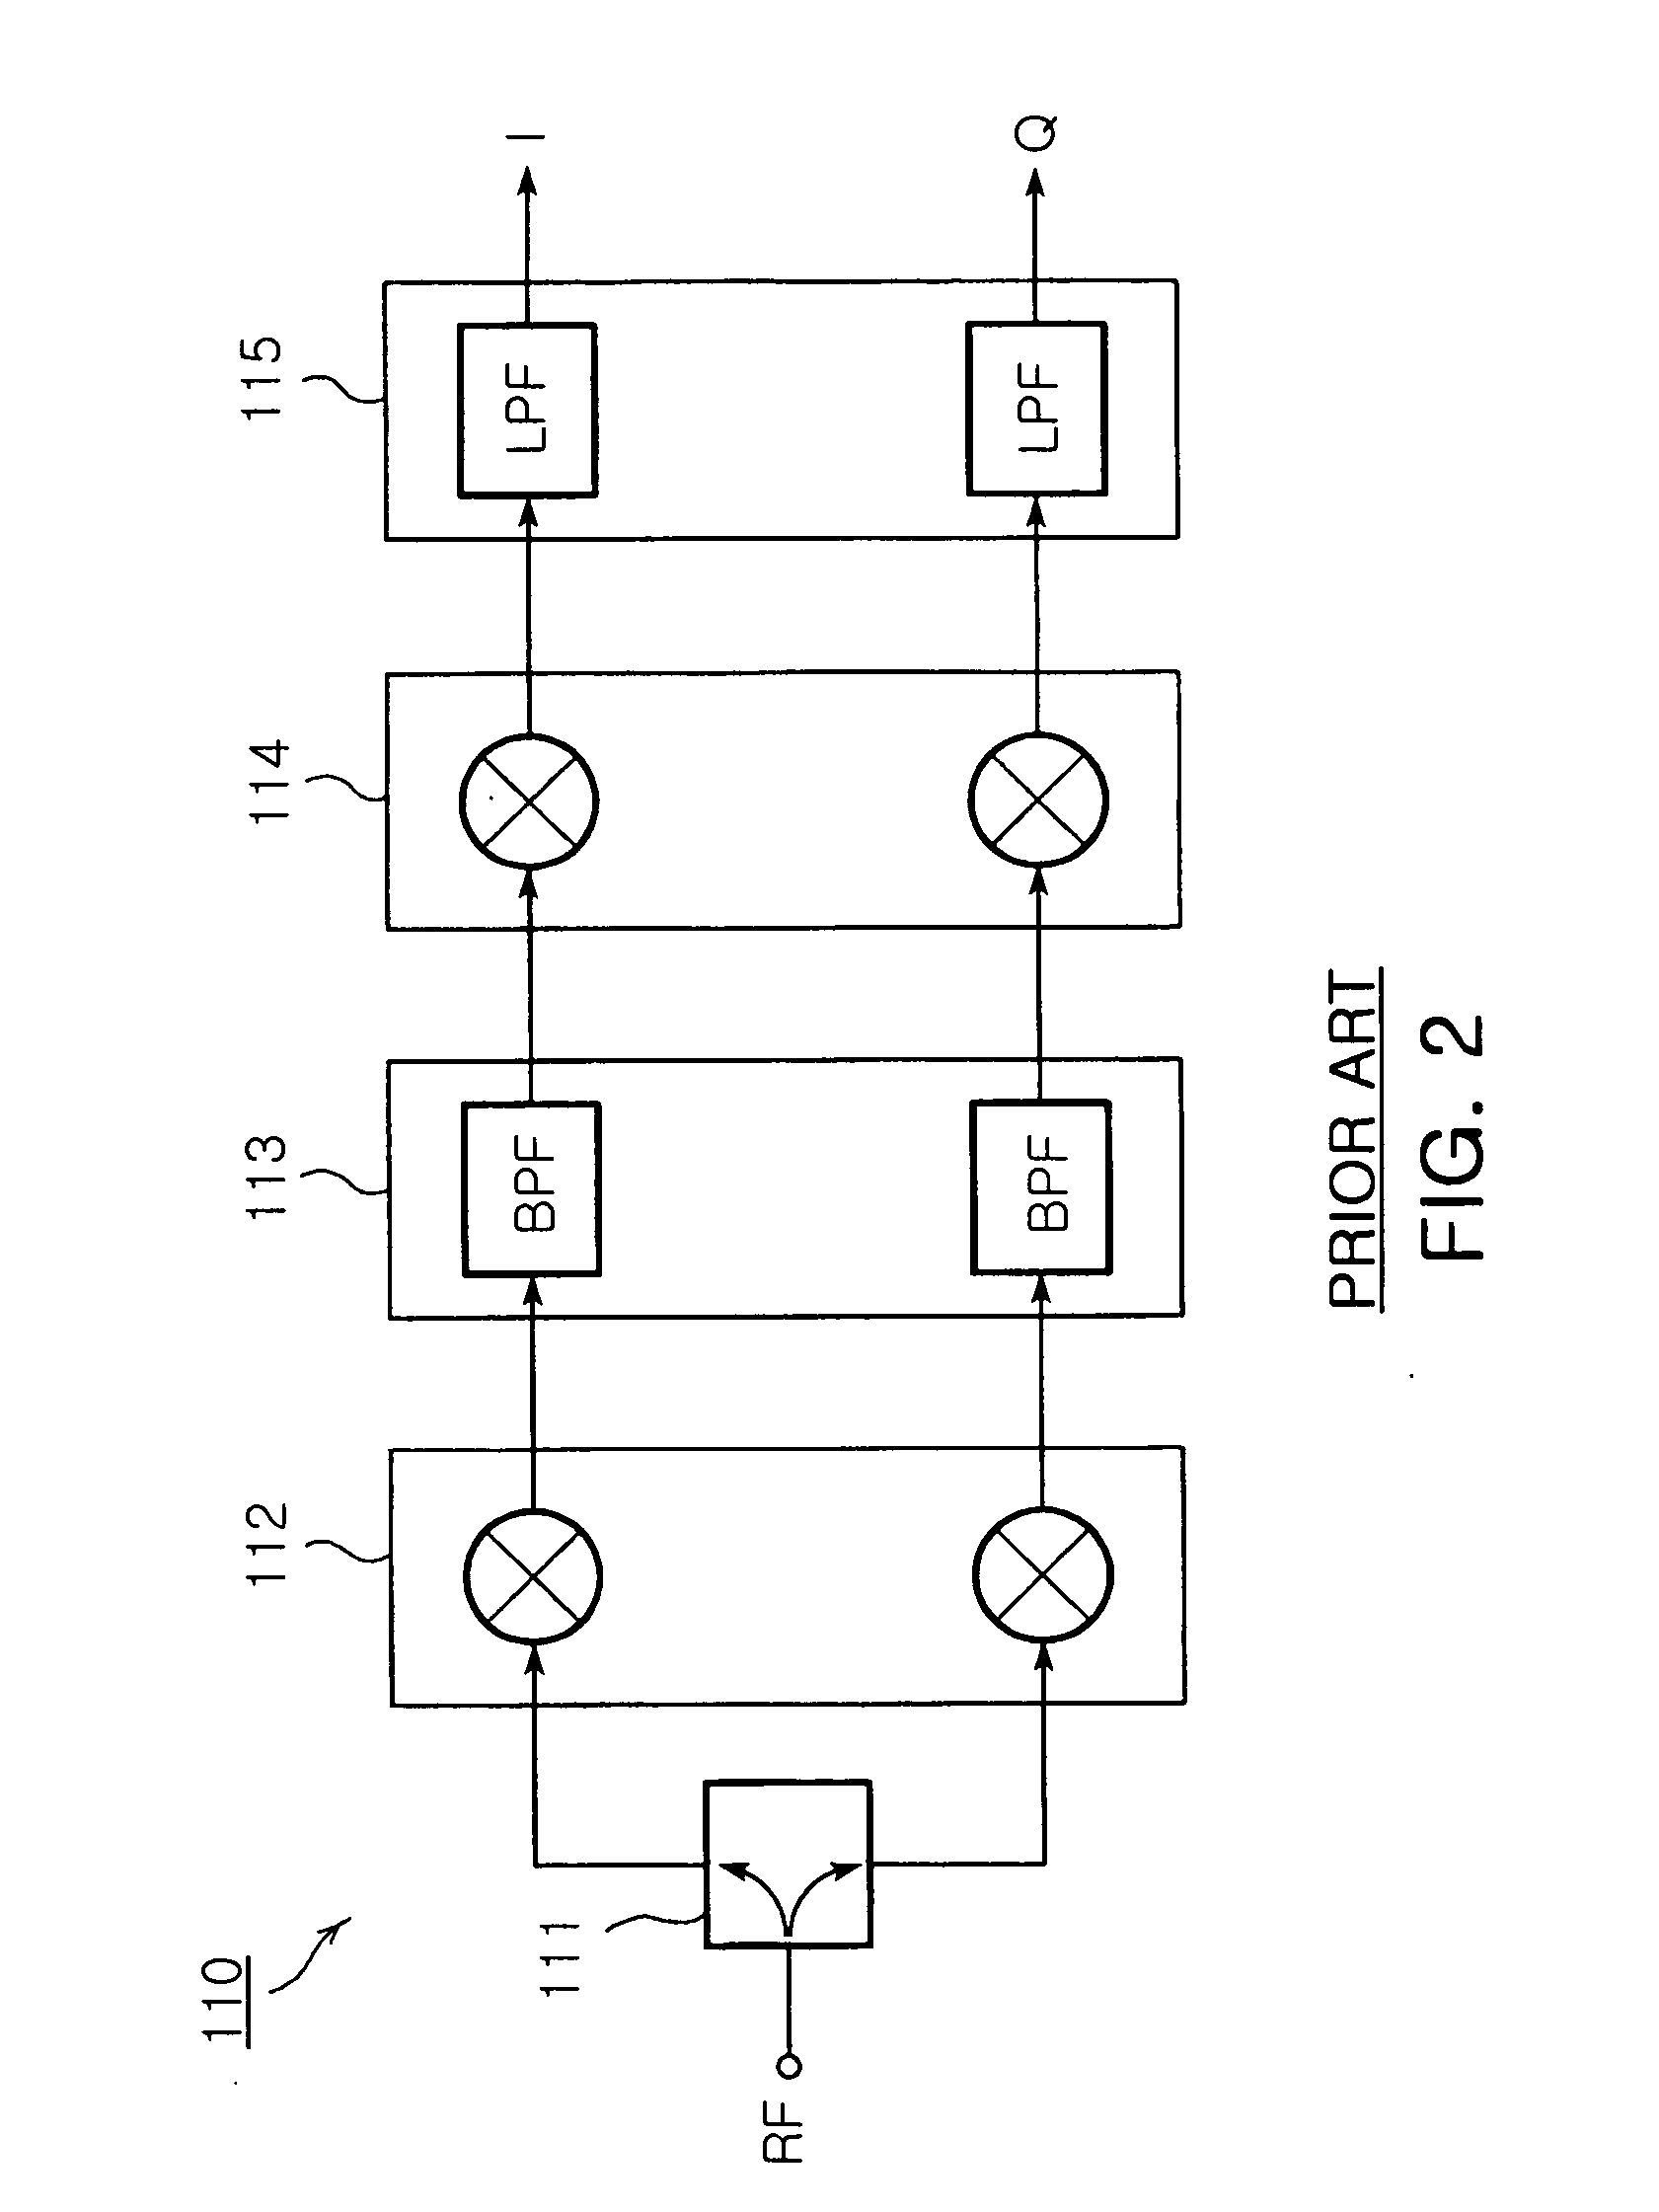 Frequency shift keying receiver for minimum shift keying, and a method for setting reference PN sequence for frequency shift keying thereof